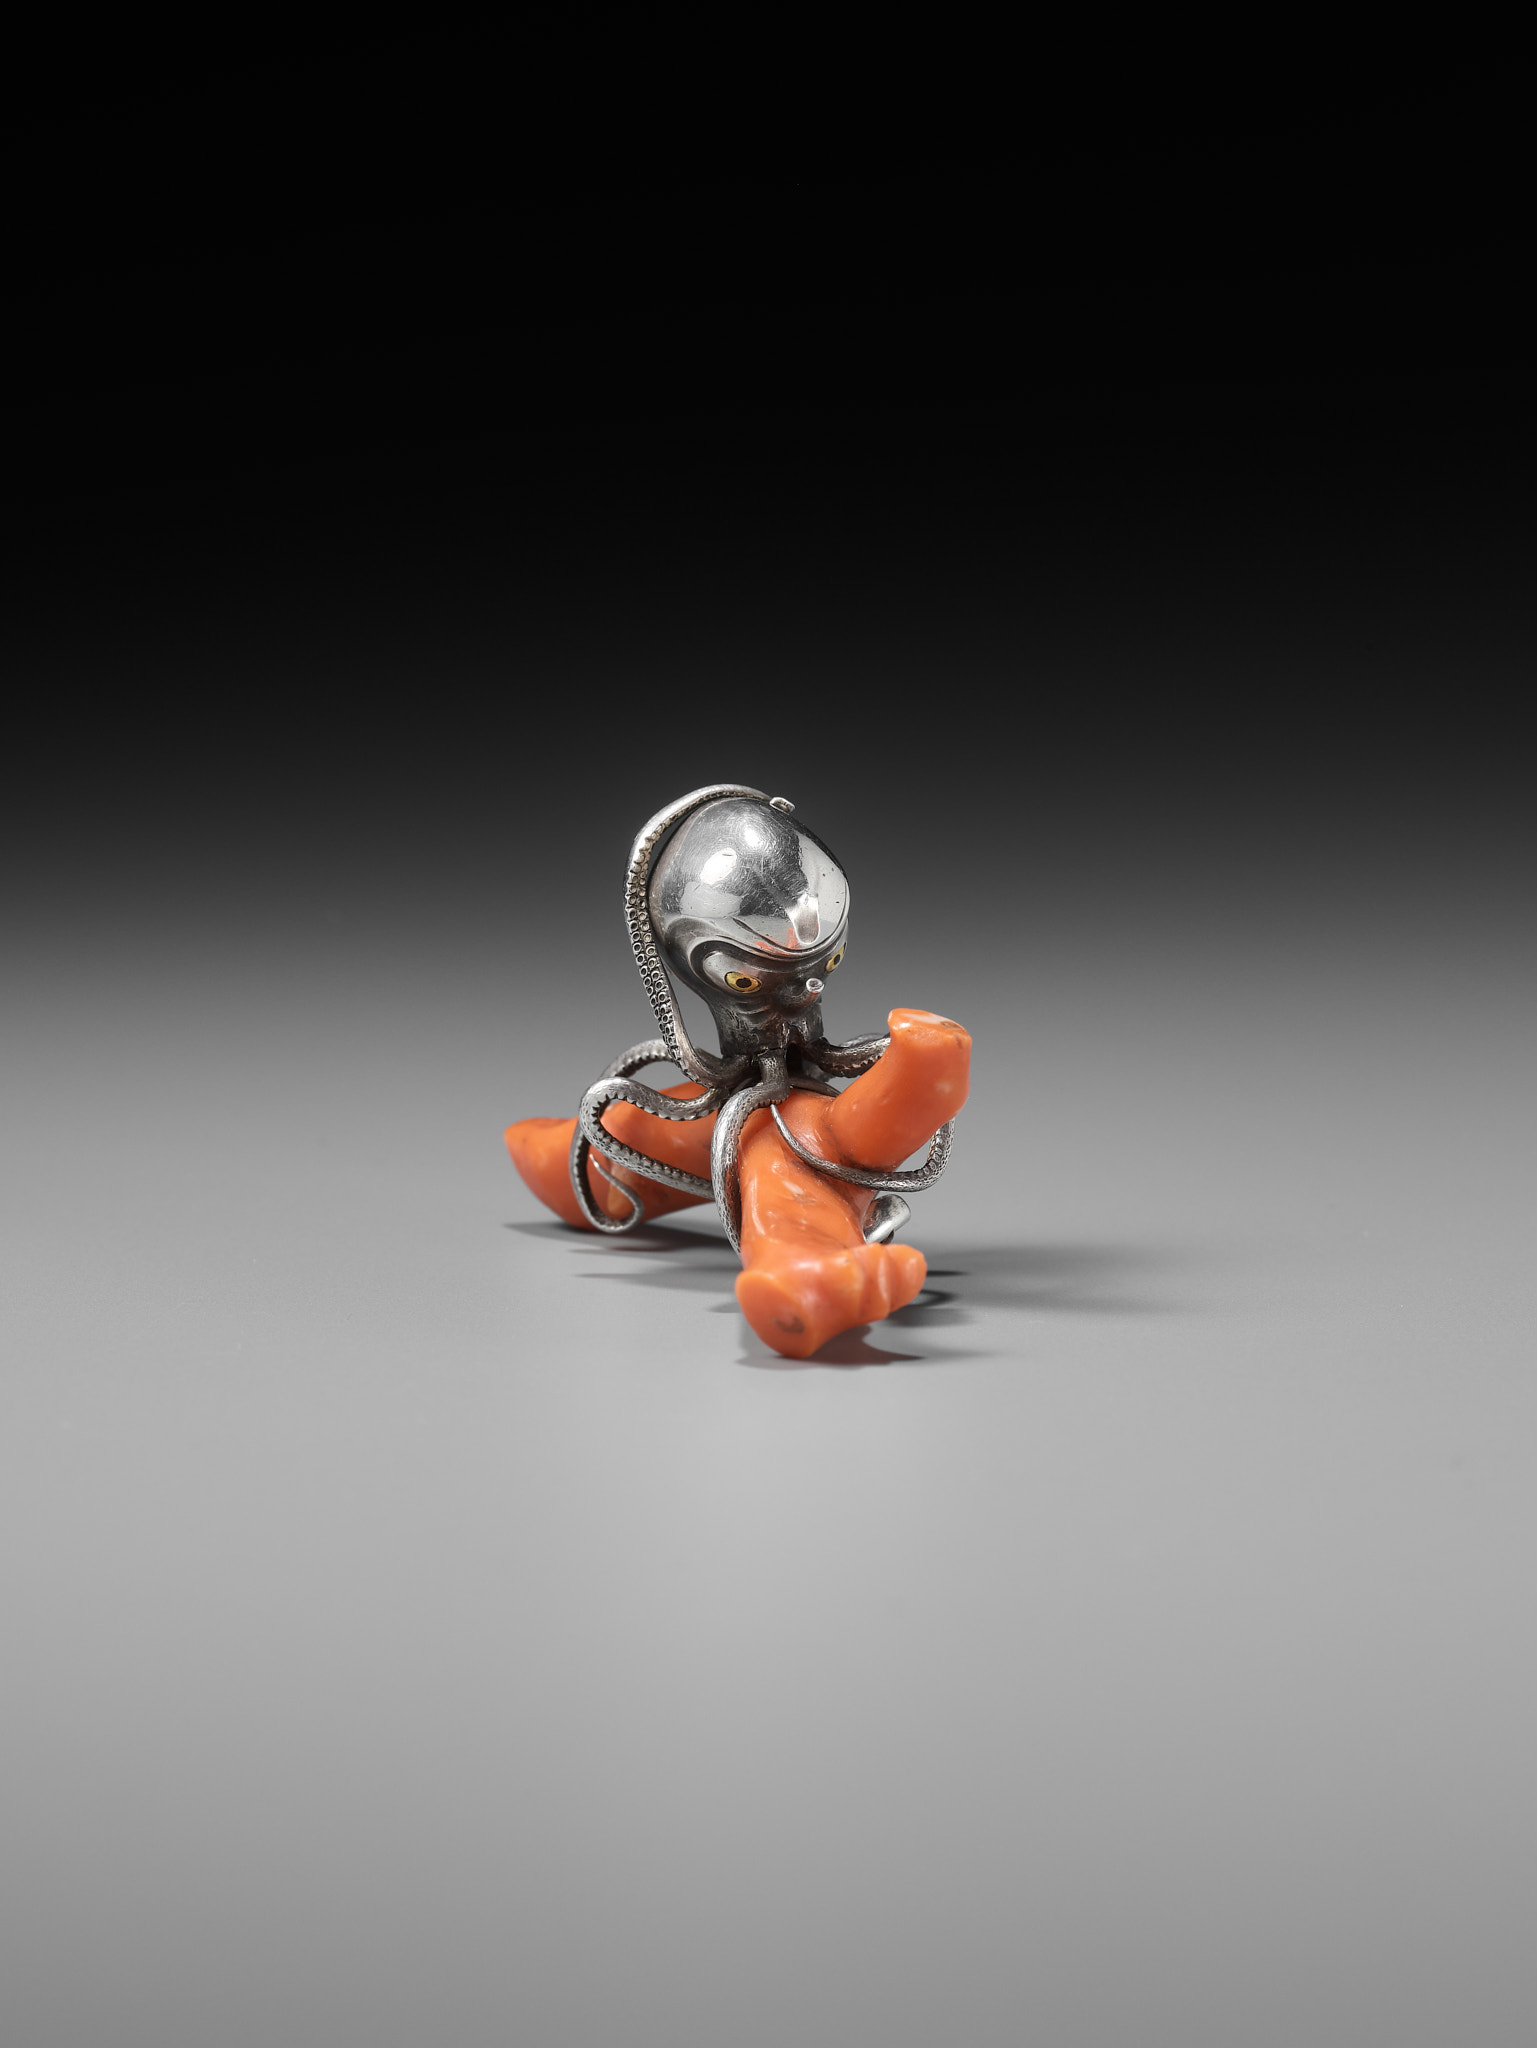 MINKOKU: A LARGE SILVER NETSUKE OF AN OCTOPUS GRASPING A PIECE OF CORAL - Image 11 of 14